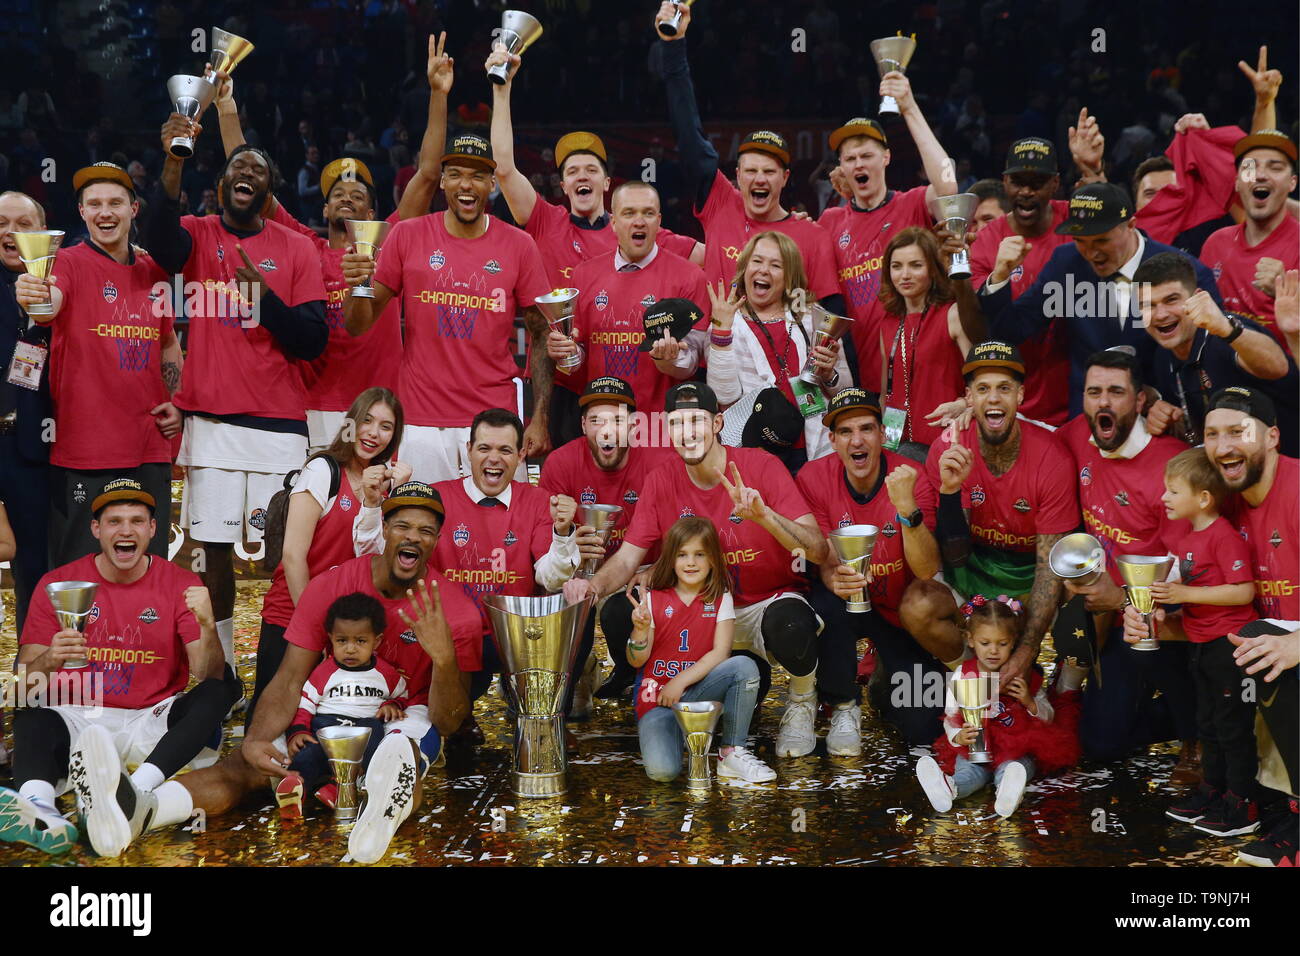 Vitoria Gasteiz, Spain. 19th May, 2019. VITORIA-GASTEIZ, SPAIN - MAY 19,  2019: BC CSKA Moscow's players celebrate winning their 2019 Basketball  Euroleague Final Four championship game against BC Anadolu Efes Istanbul, at